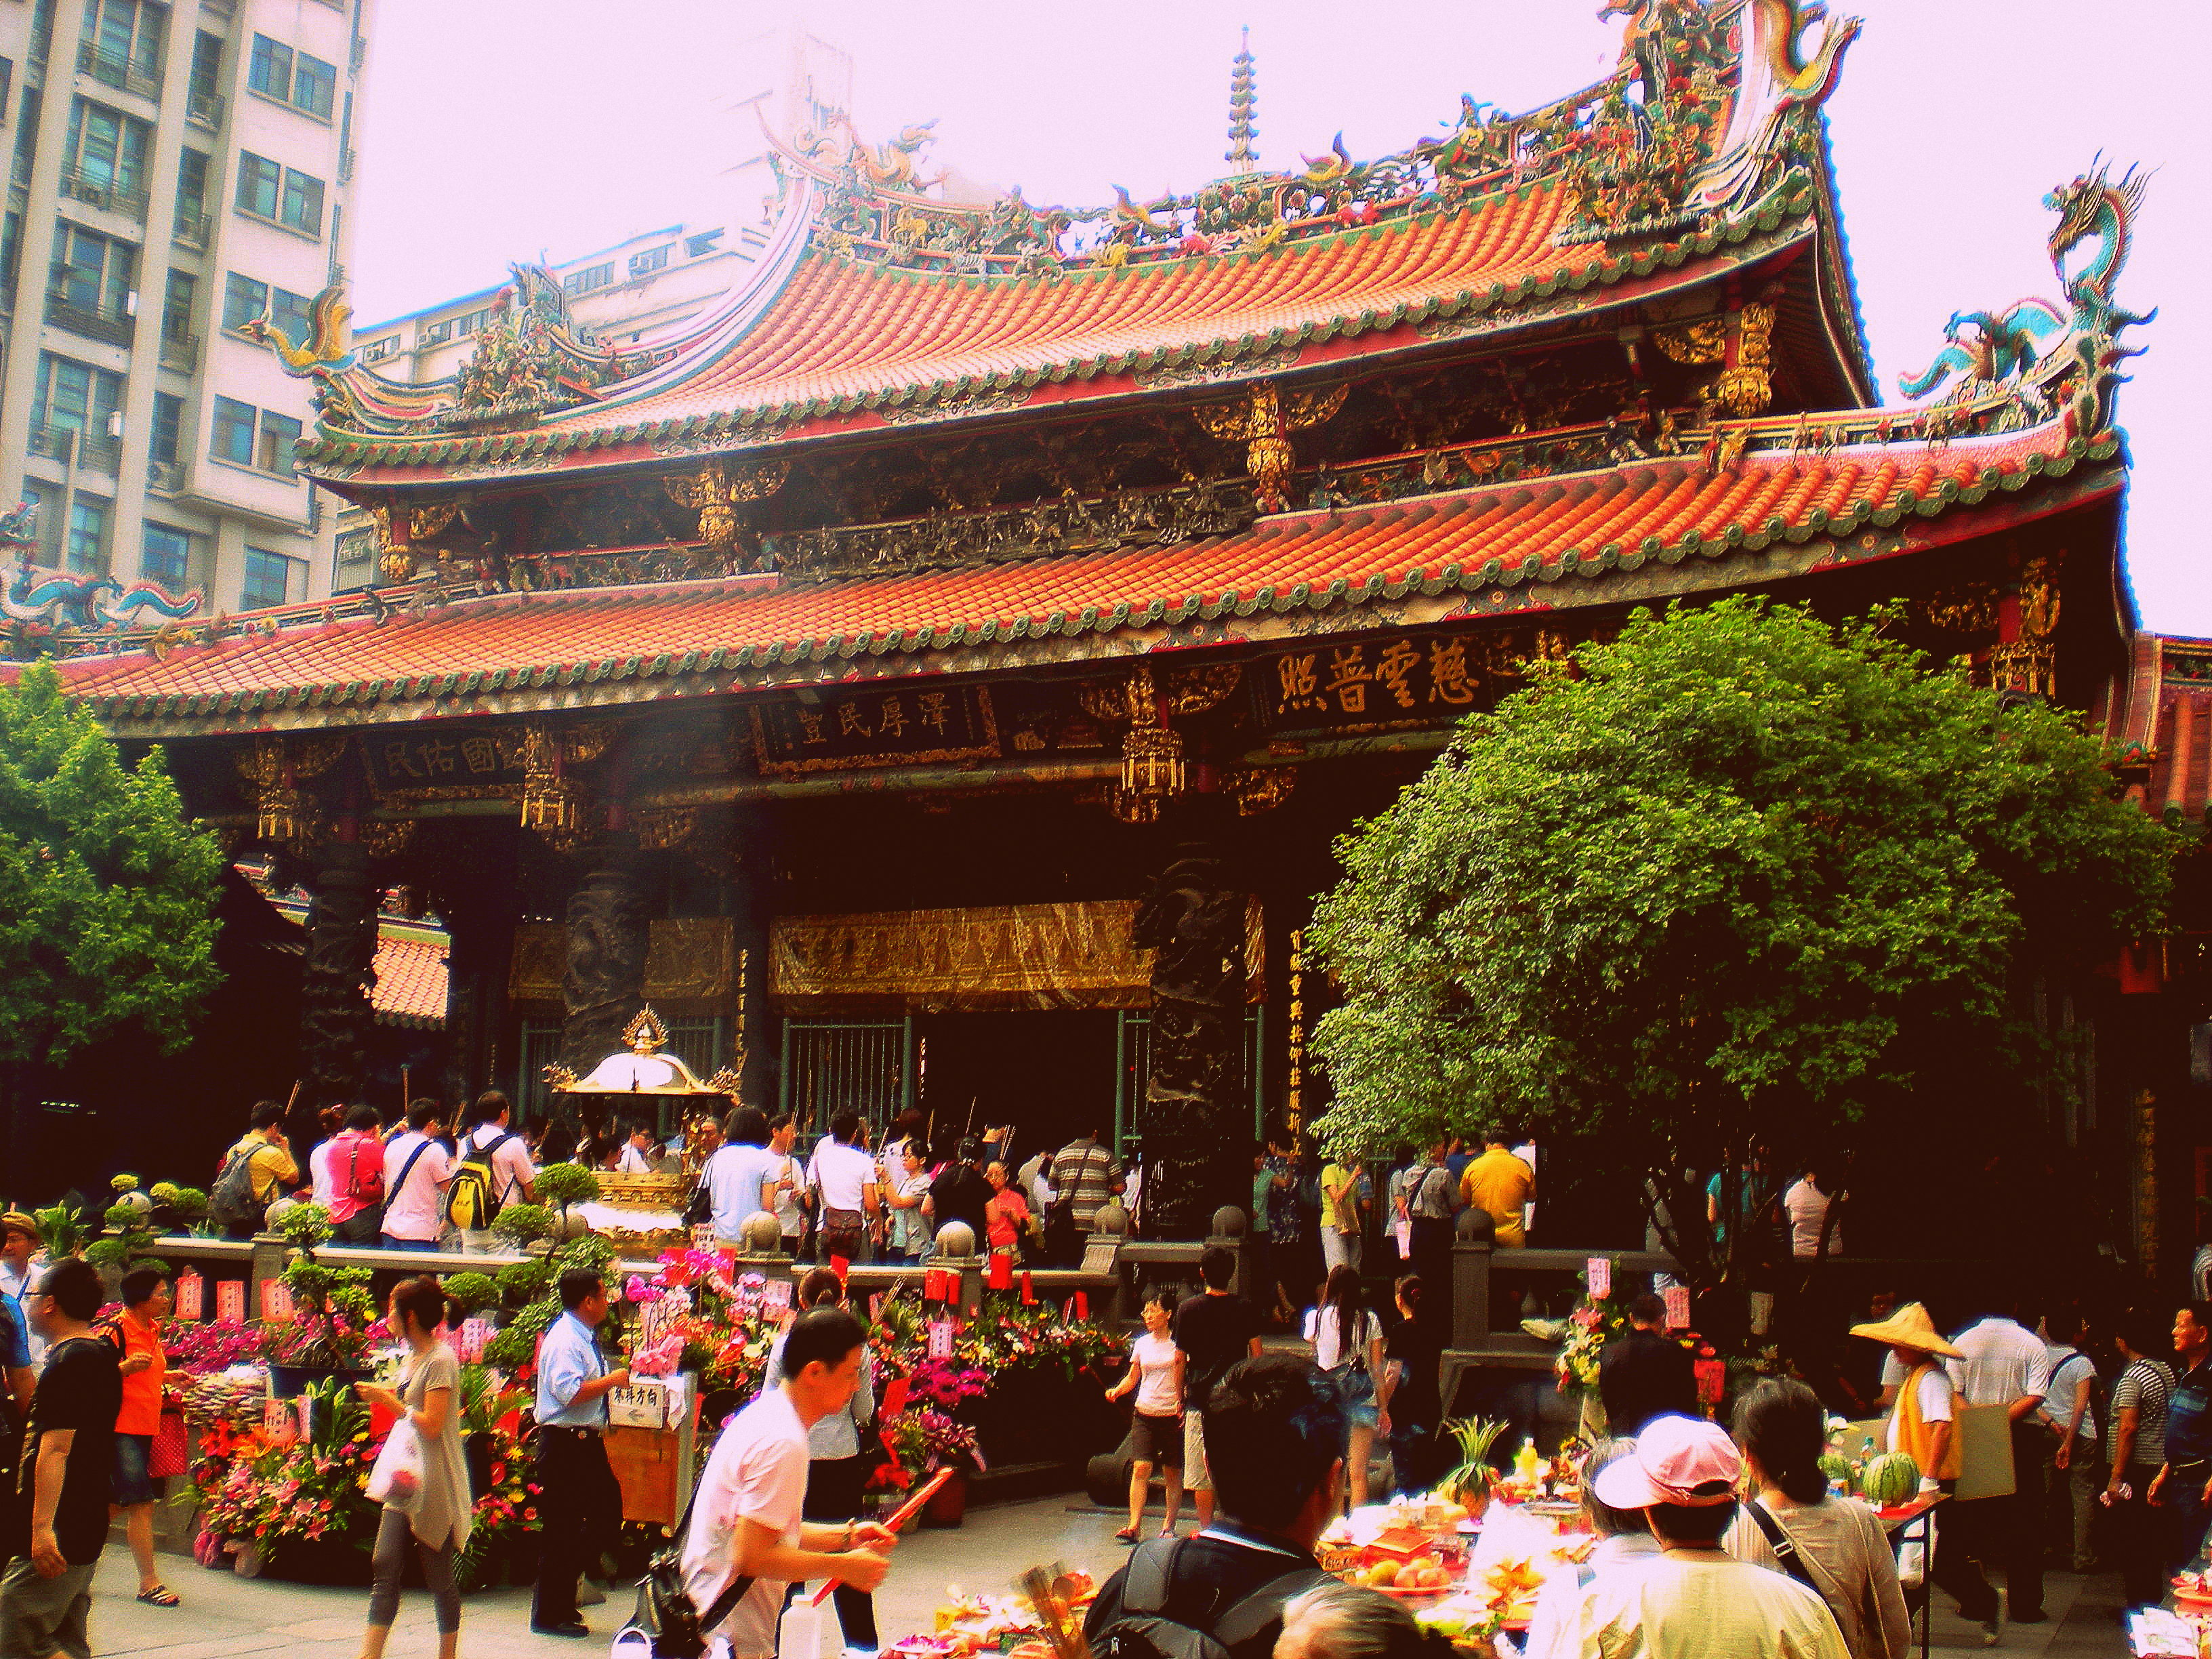 Traditional temple during a festival, Taiwan